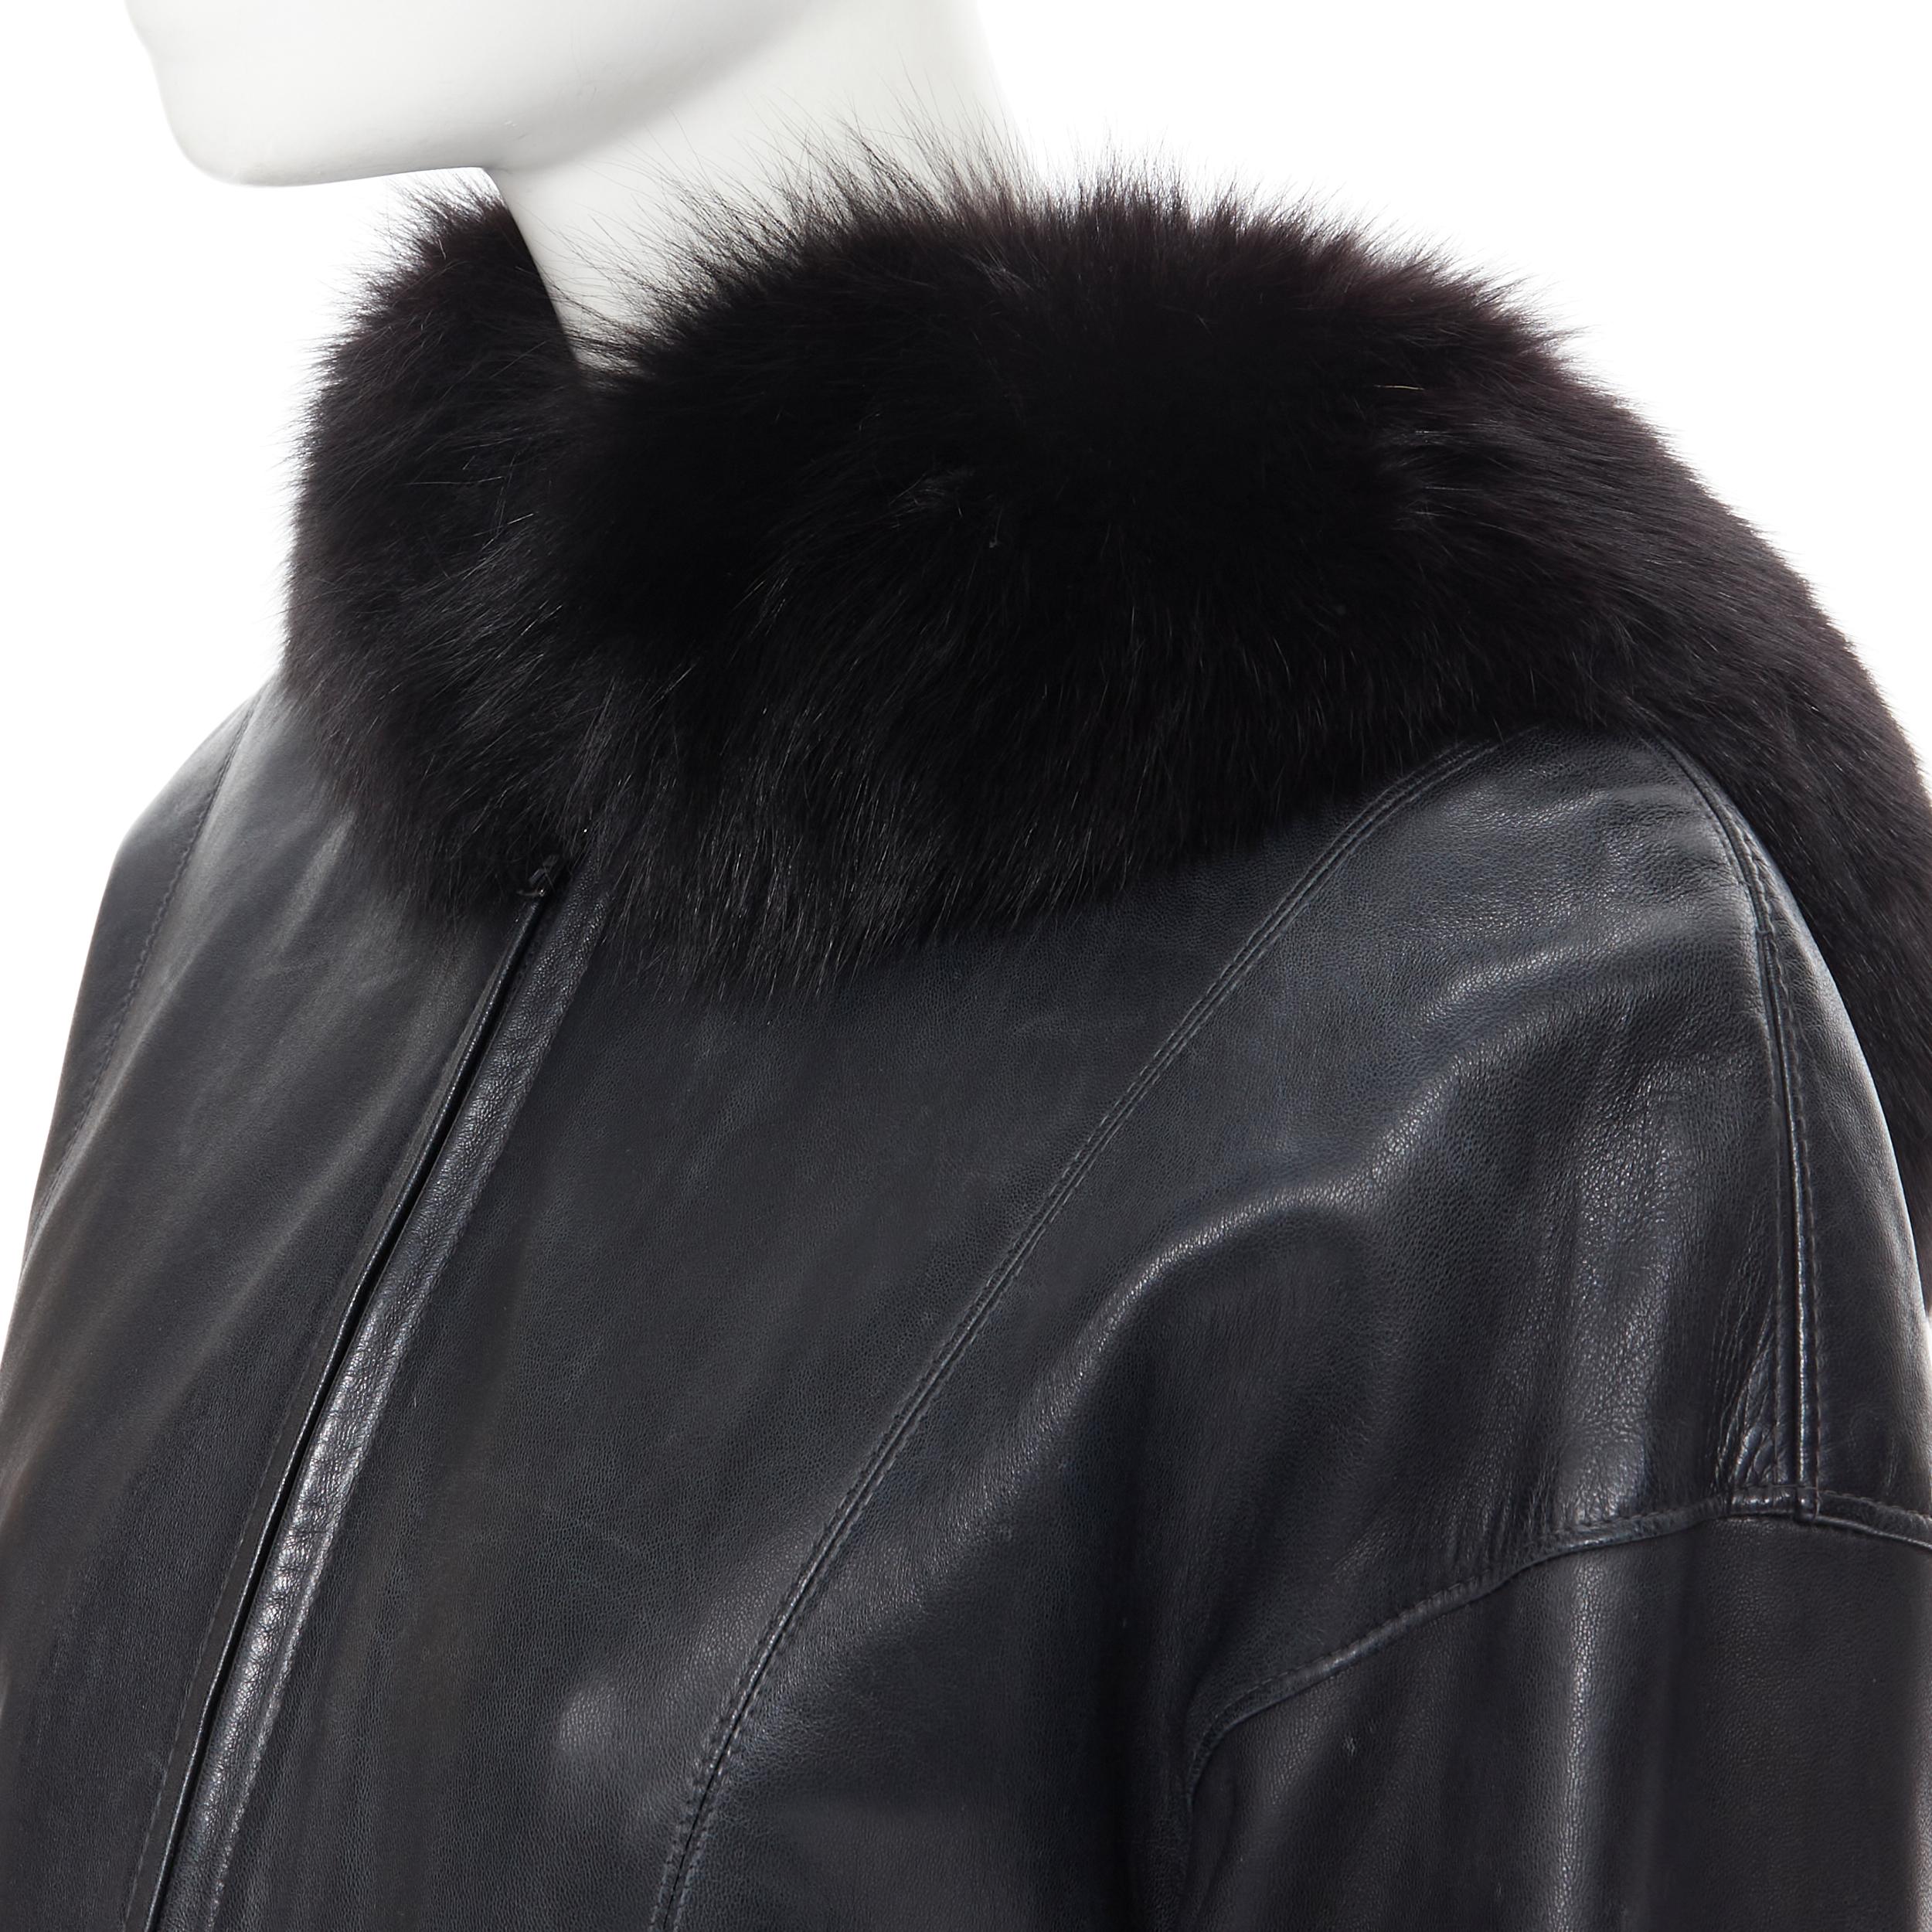 vintage CLAUDE MONTANA IDEAL CUIR fox fur hood fit flared leather jacket FR38 S Reference: GIYG/A00002 
Brand: Ideal Cuir 
Designer: Clauda Montana 
Material: Leather 
Color: Black 
Pattern: Solid 
Closure: Zip 
Extra Detail: Fox fur trimming along